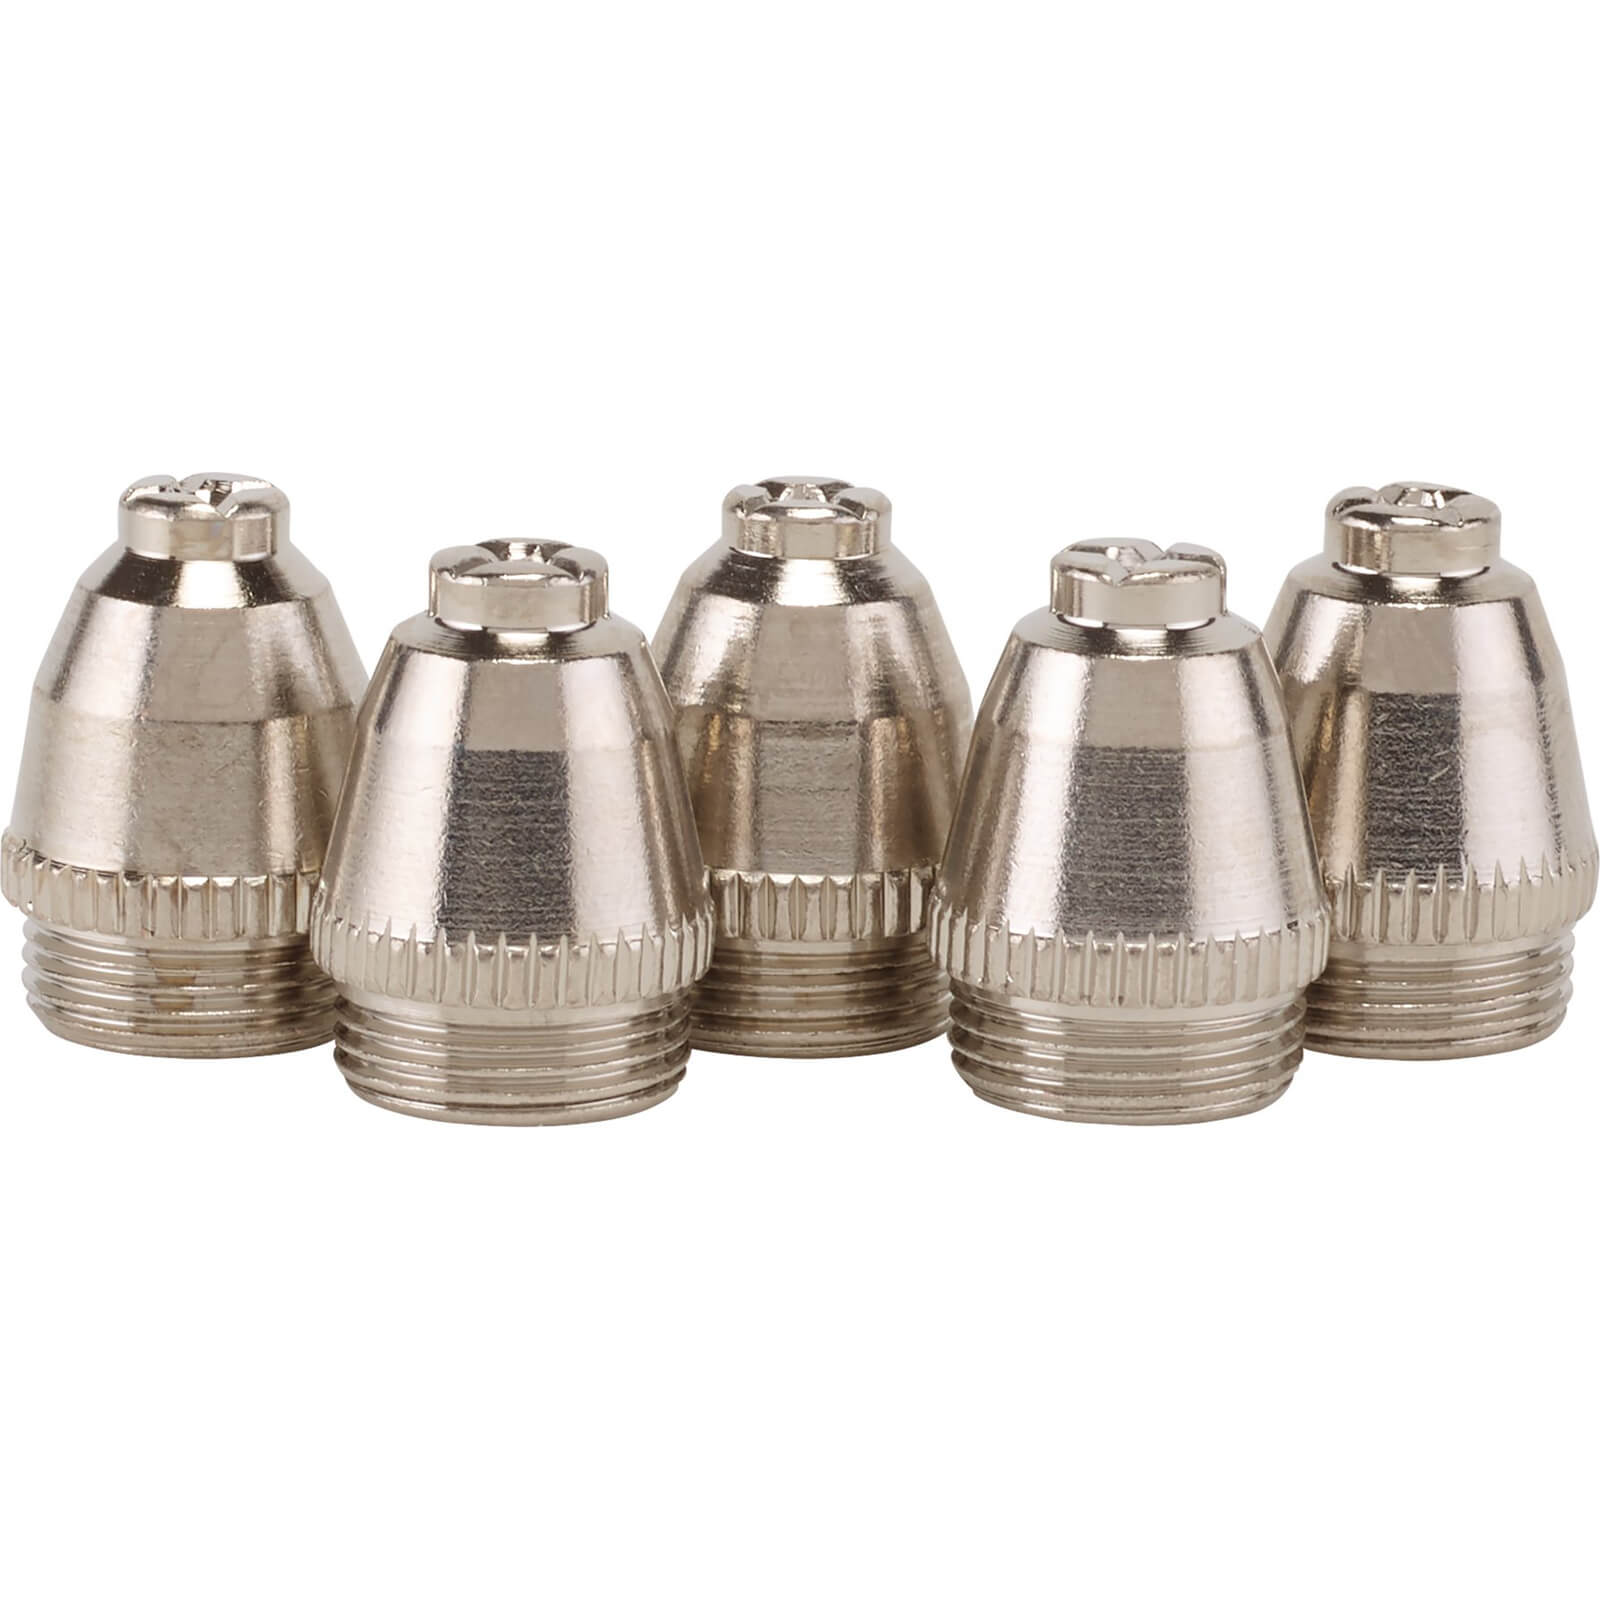 Image of Draper Nozzle for 03357 Plasma Cutting Torch Pack of 5